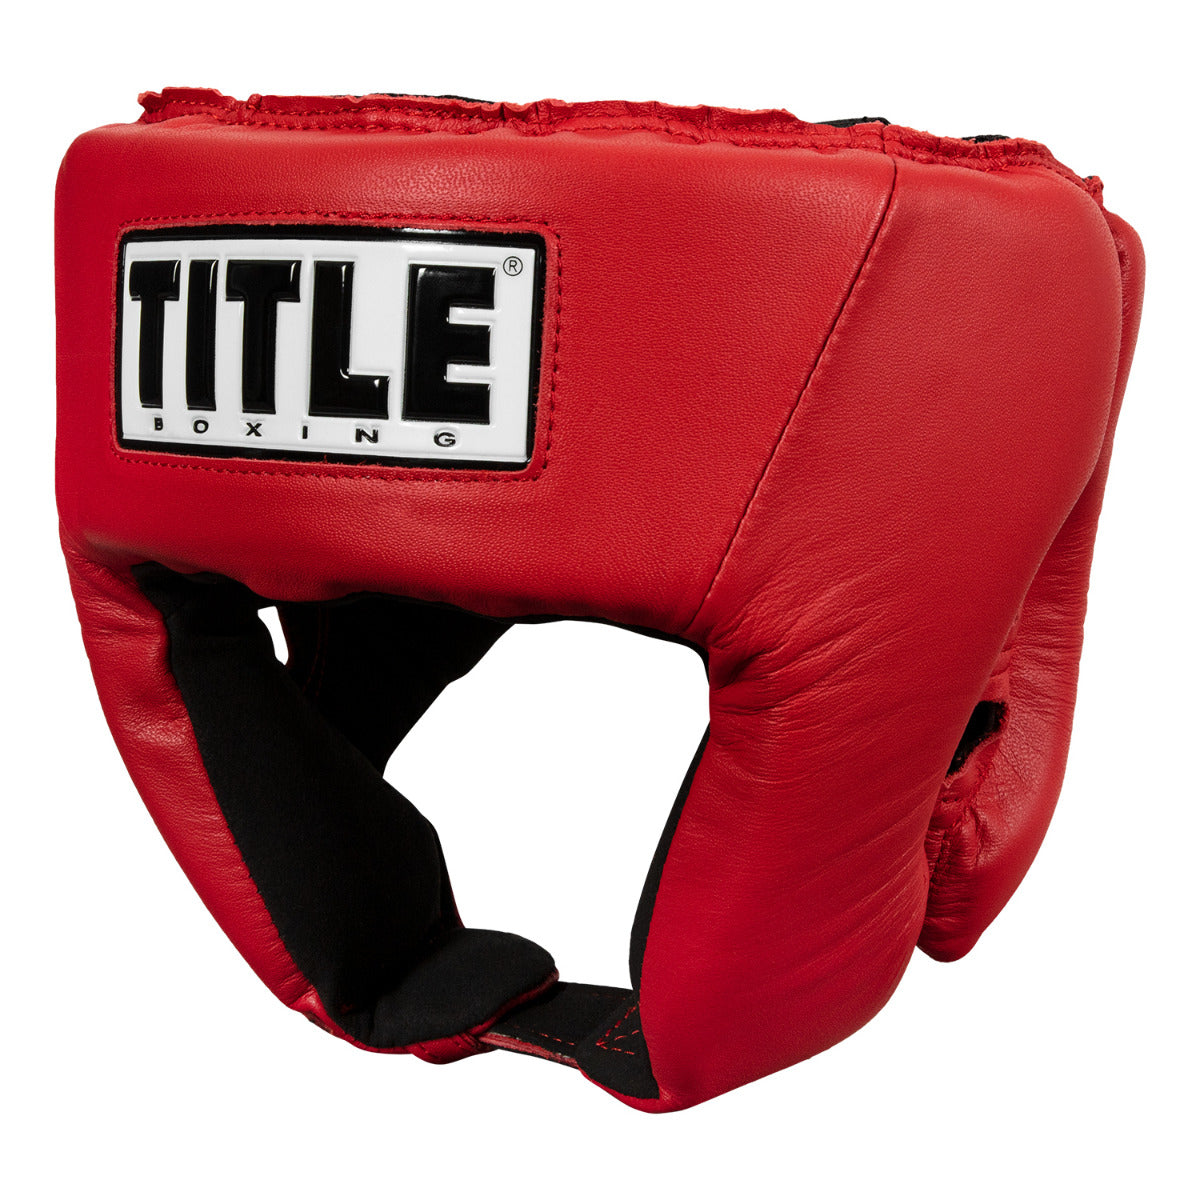 TITLE USA Boxing Competition Headgear - Open Face